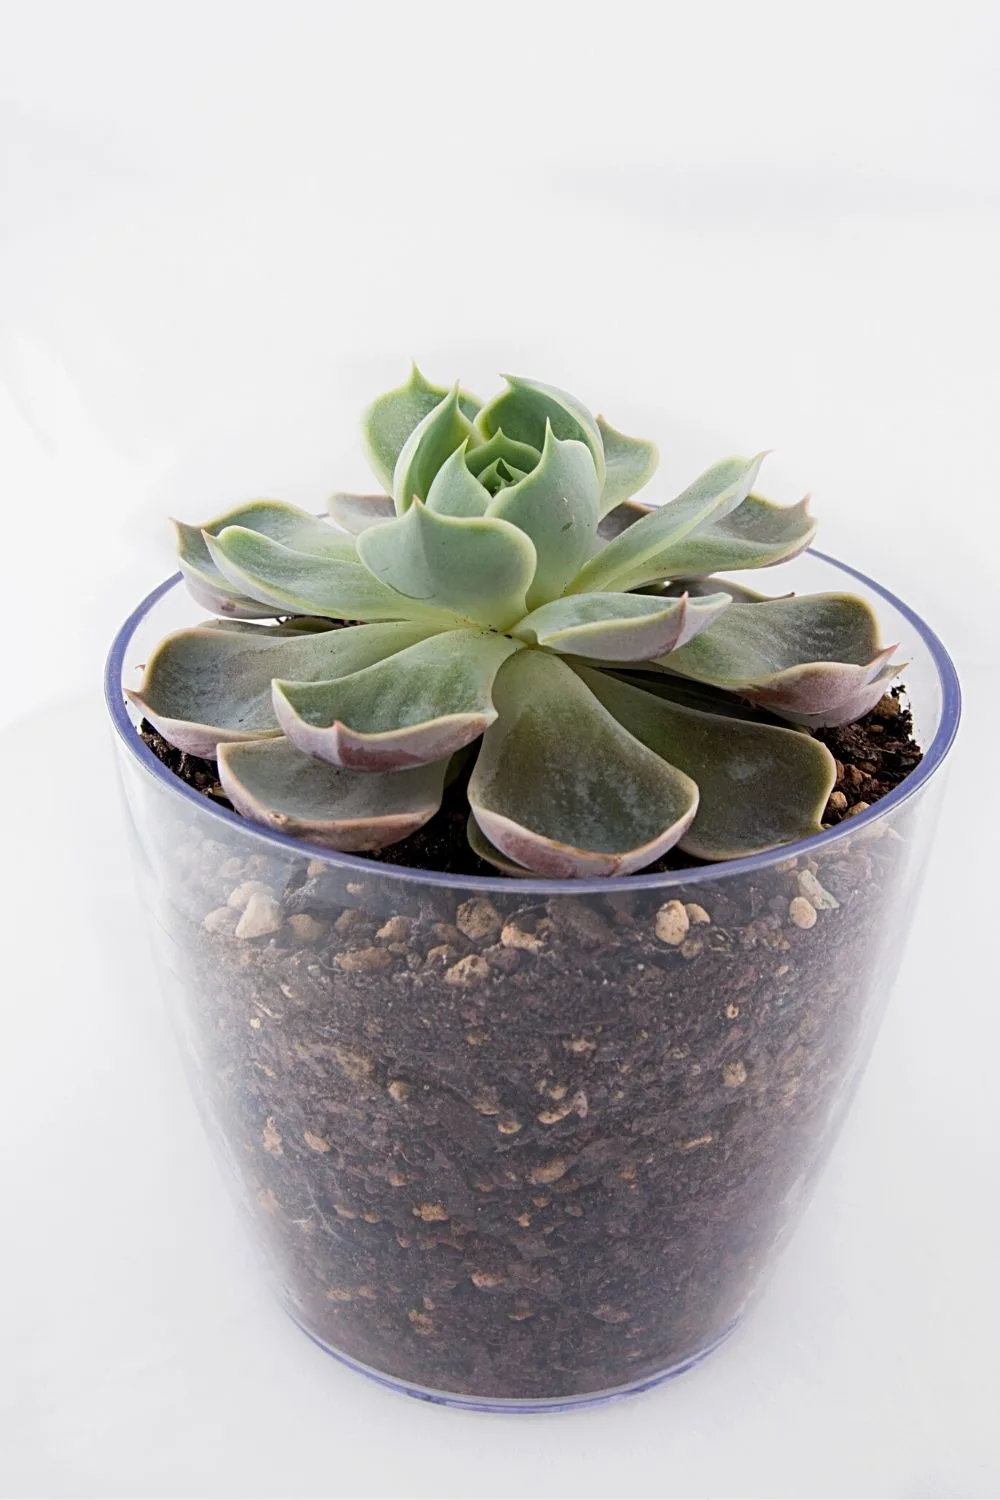 The potting mix for succulents is also great for Hoyas as it contains sand, making it a well-draining soil